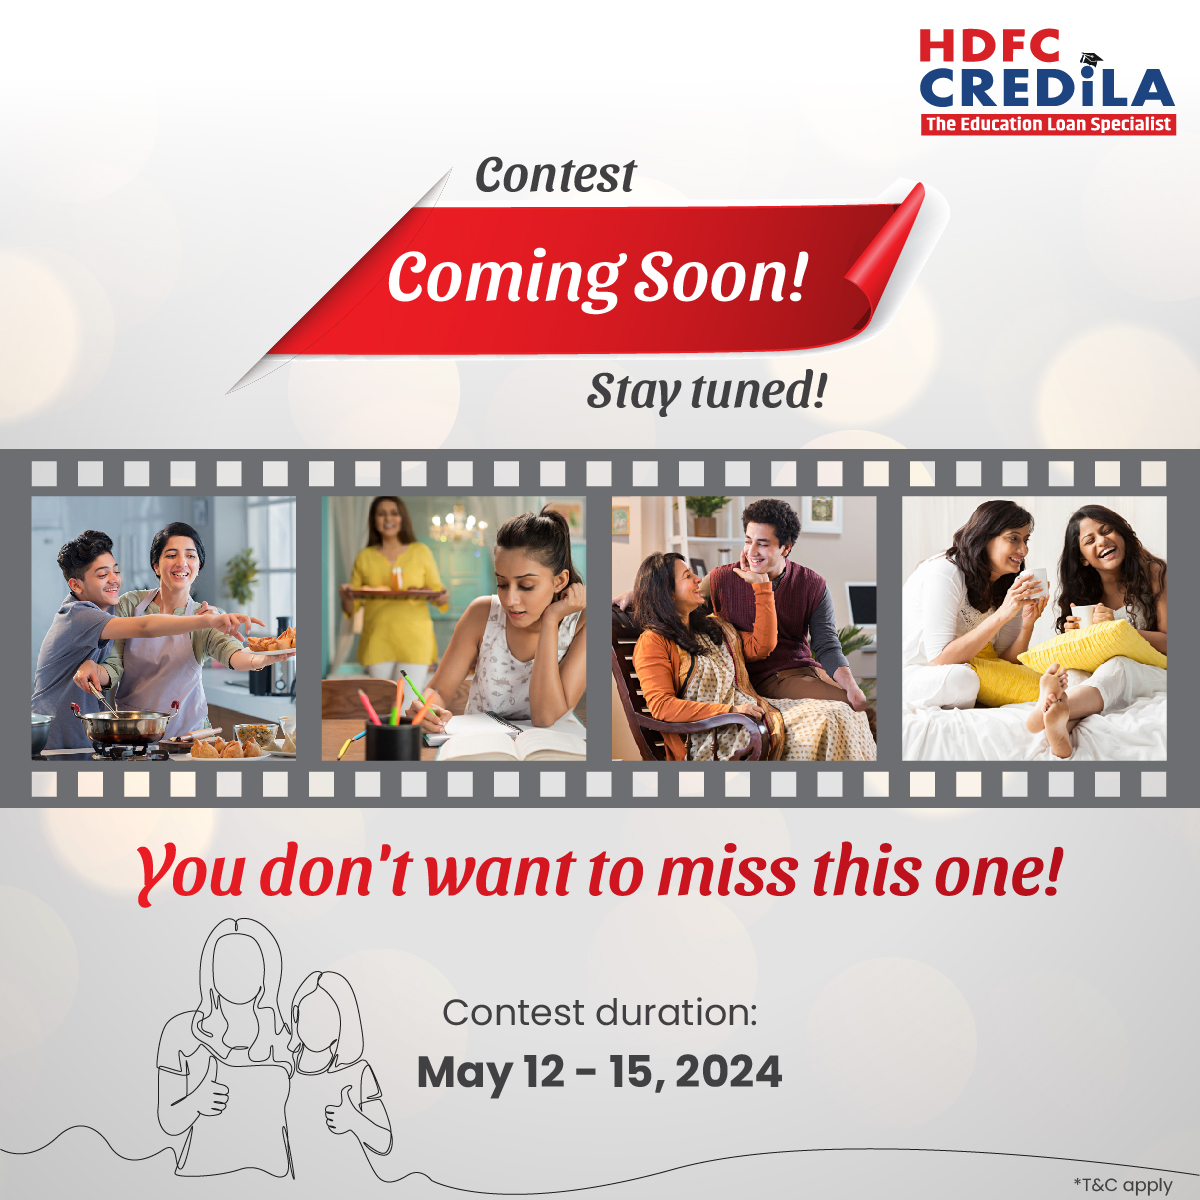 It's contest time, everyone! Watch this space for details. 
*T&C apply

#HDFCCredila #HDFCCredilaContest #Contest #comment #ContestAlert #ContestTime #GiveAway #GiveAwayAlert #ContestGiveAway #GiveawayContest #CommentContest #ComingSoon #StayTuned #Participate #Win #AmazonVoucher